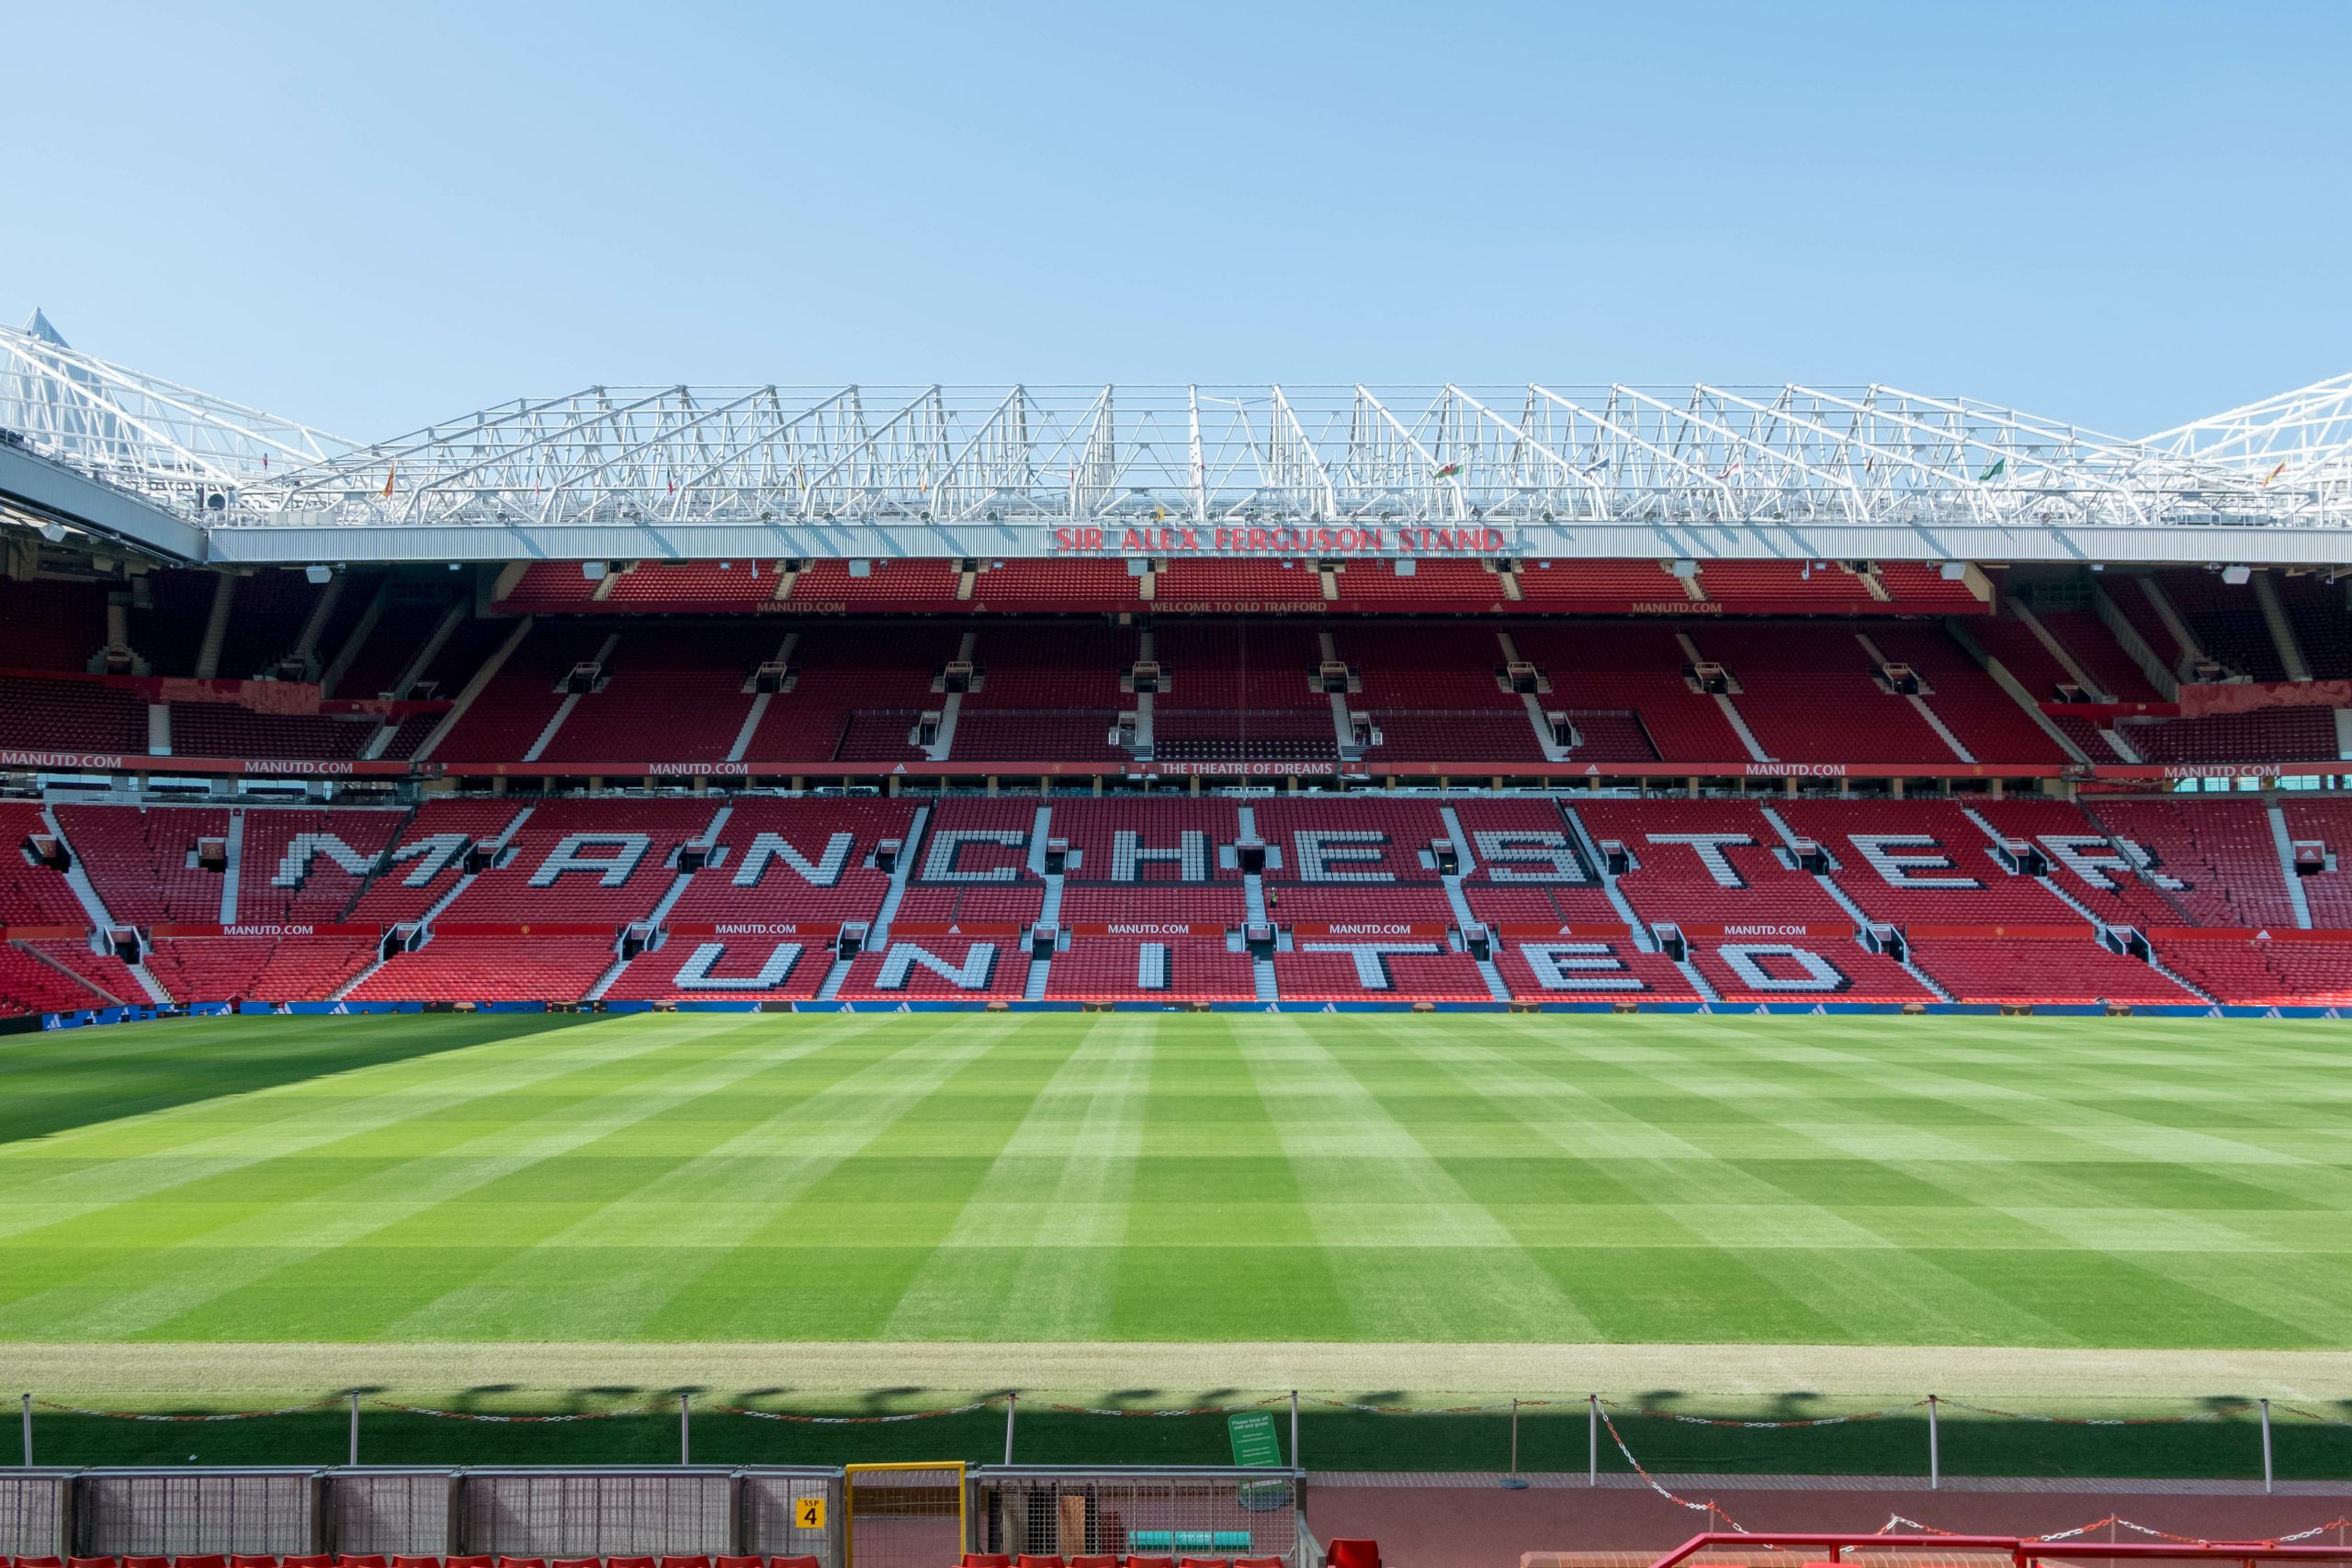 Old Trafford stadium the home of Manchester United